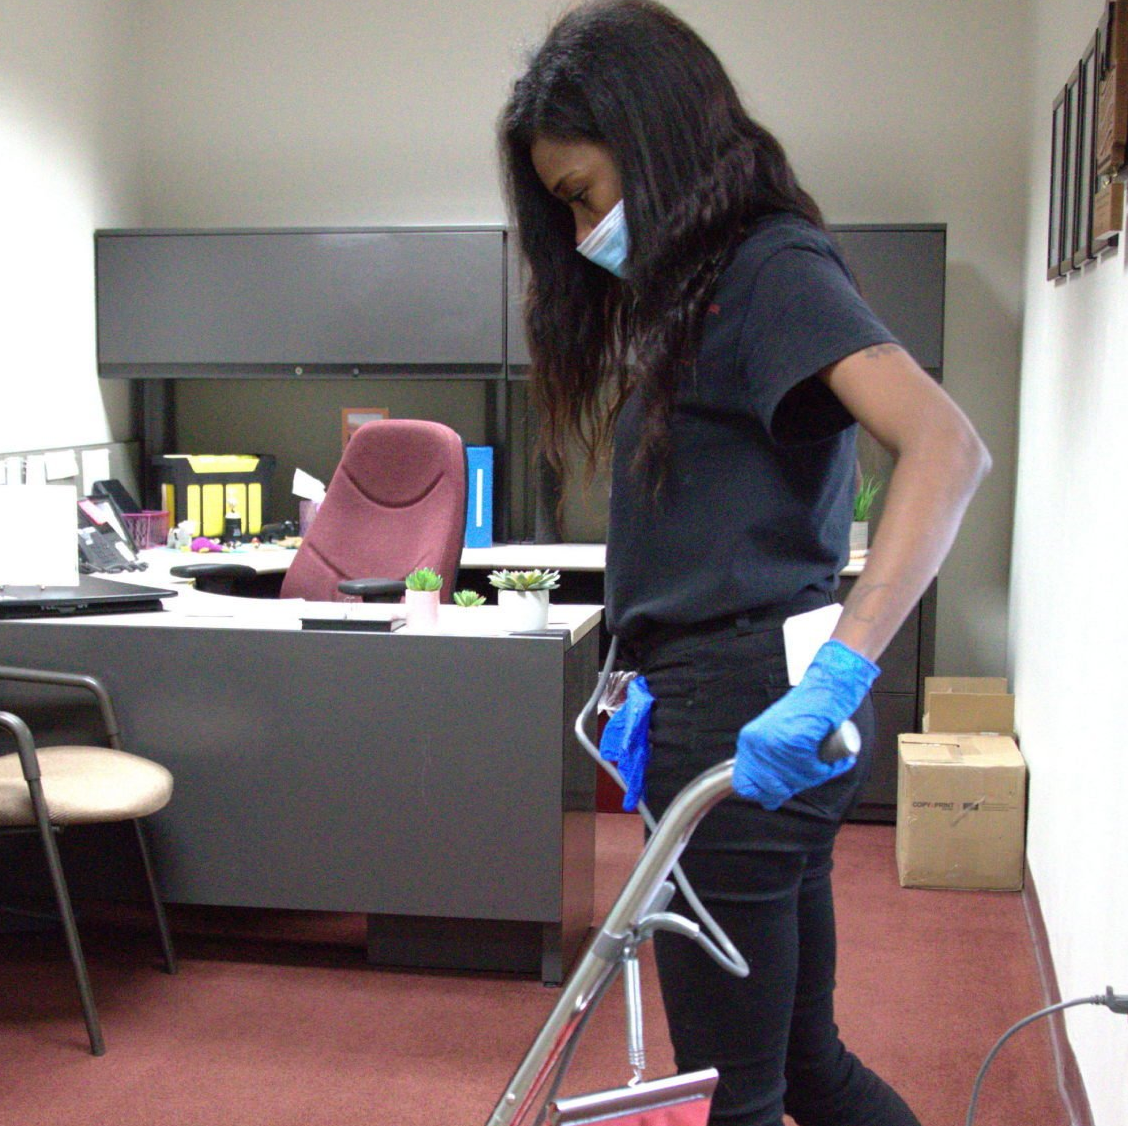 a woman wearing a mask and gloves is pushing a vacuum